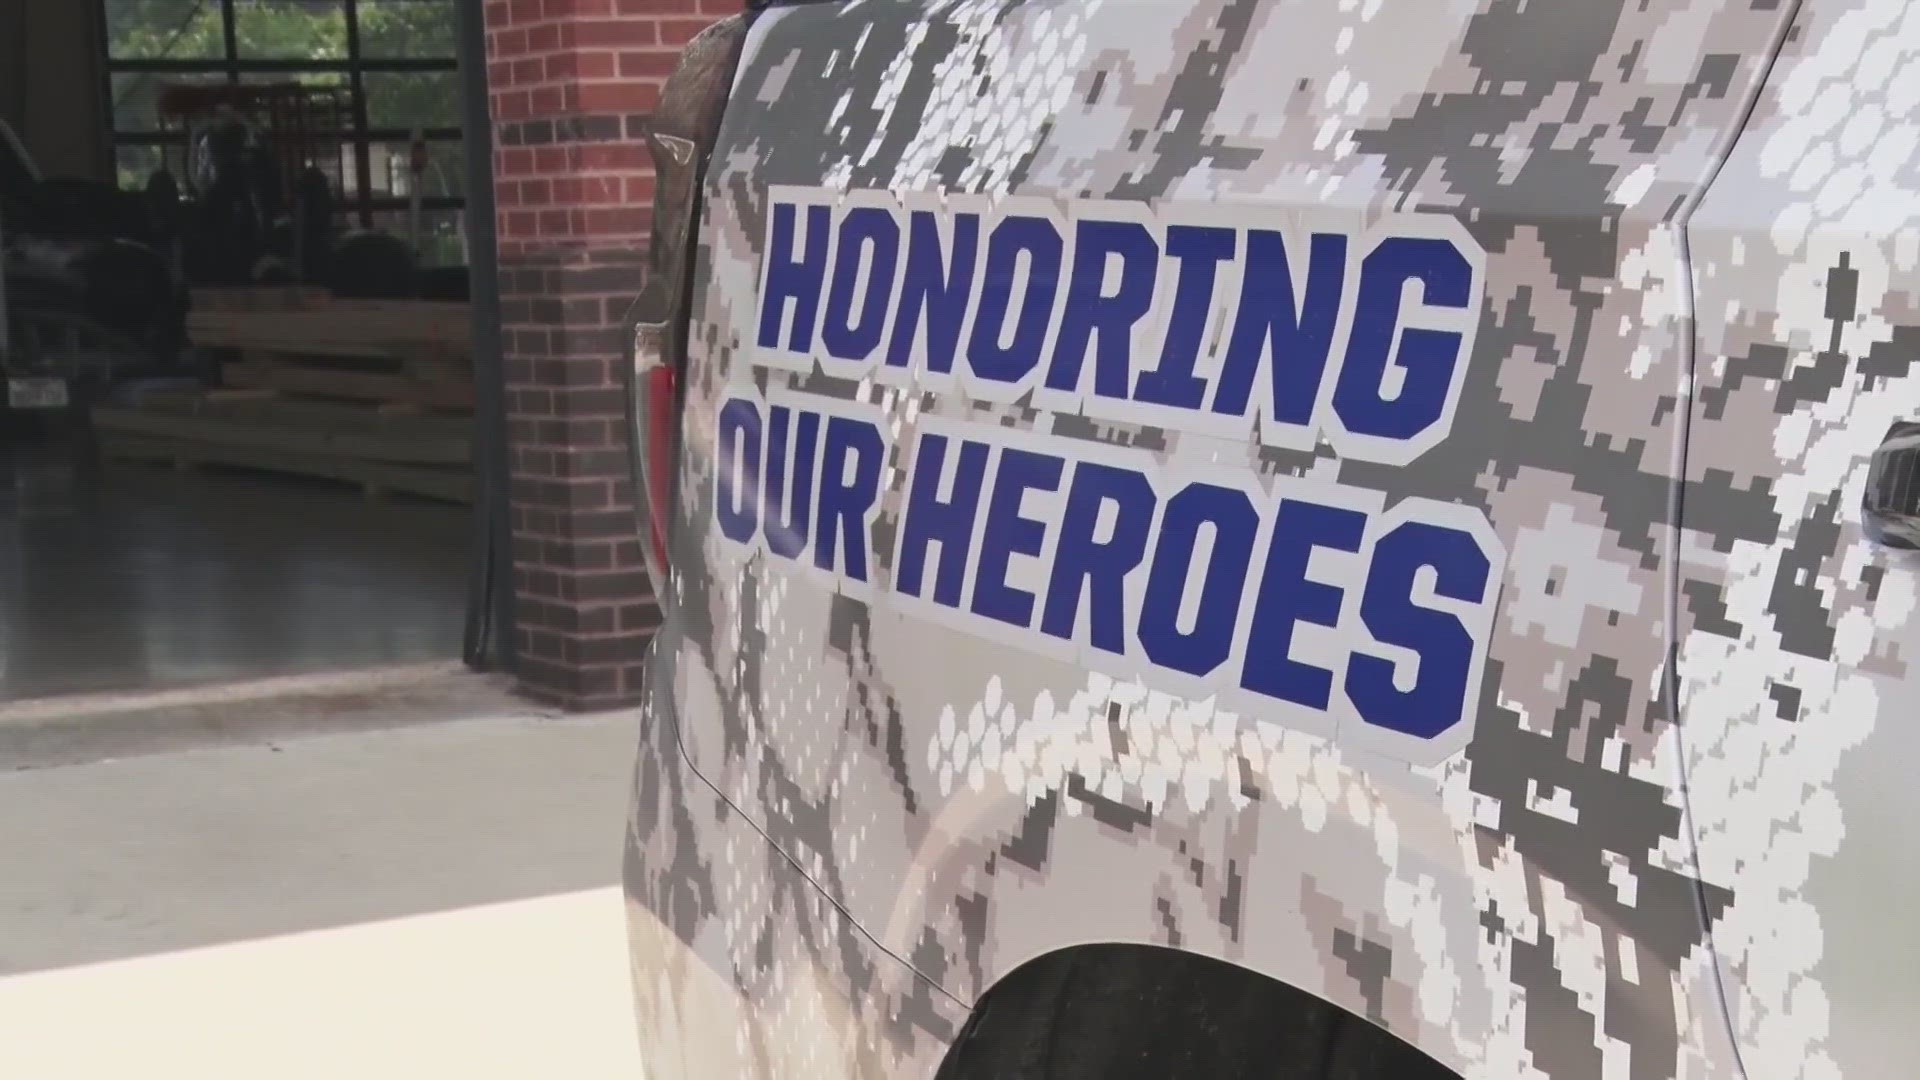 The West Coast chapter of Carry the Load has spent 30 days traveling across the country to honor the fallen soldiers, including walking their way through Waco.